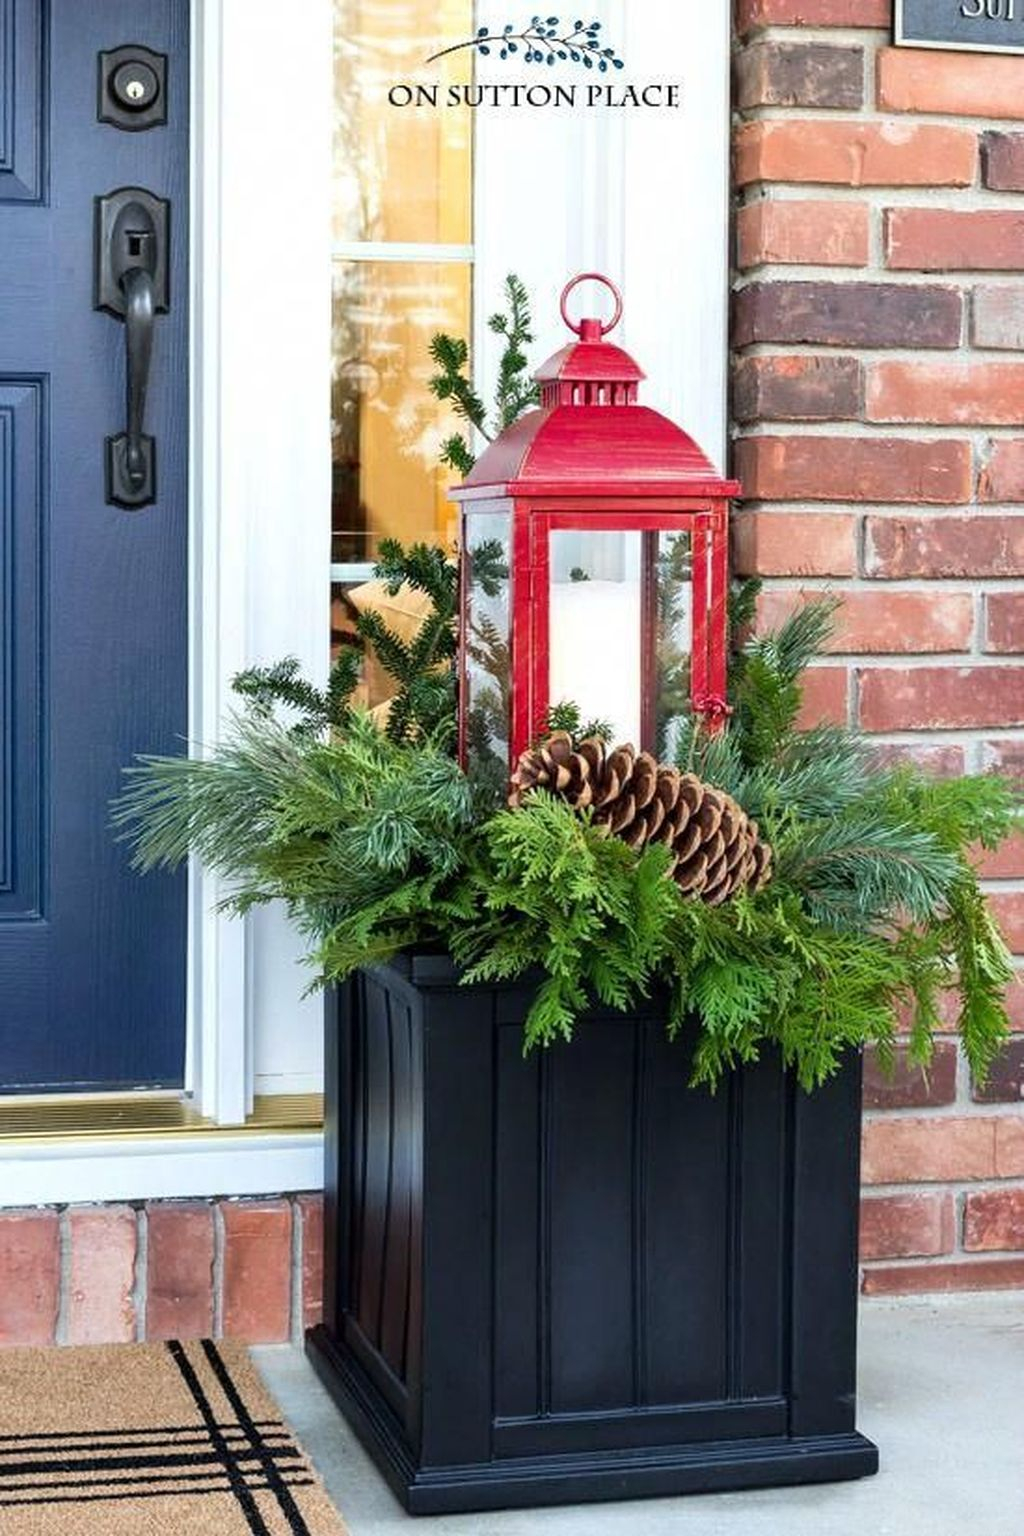 Marvelous Outdoor Holiday Planter Ideas To Beauty Porch Décor 01